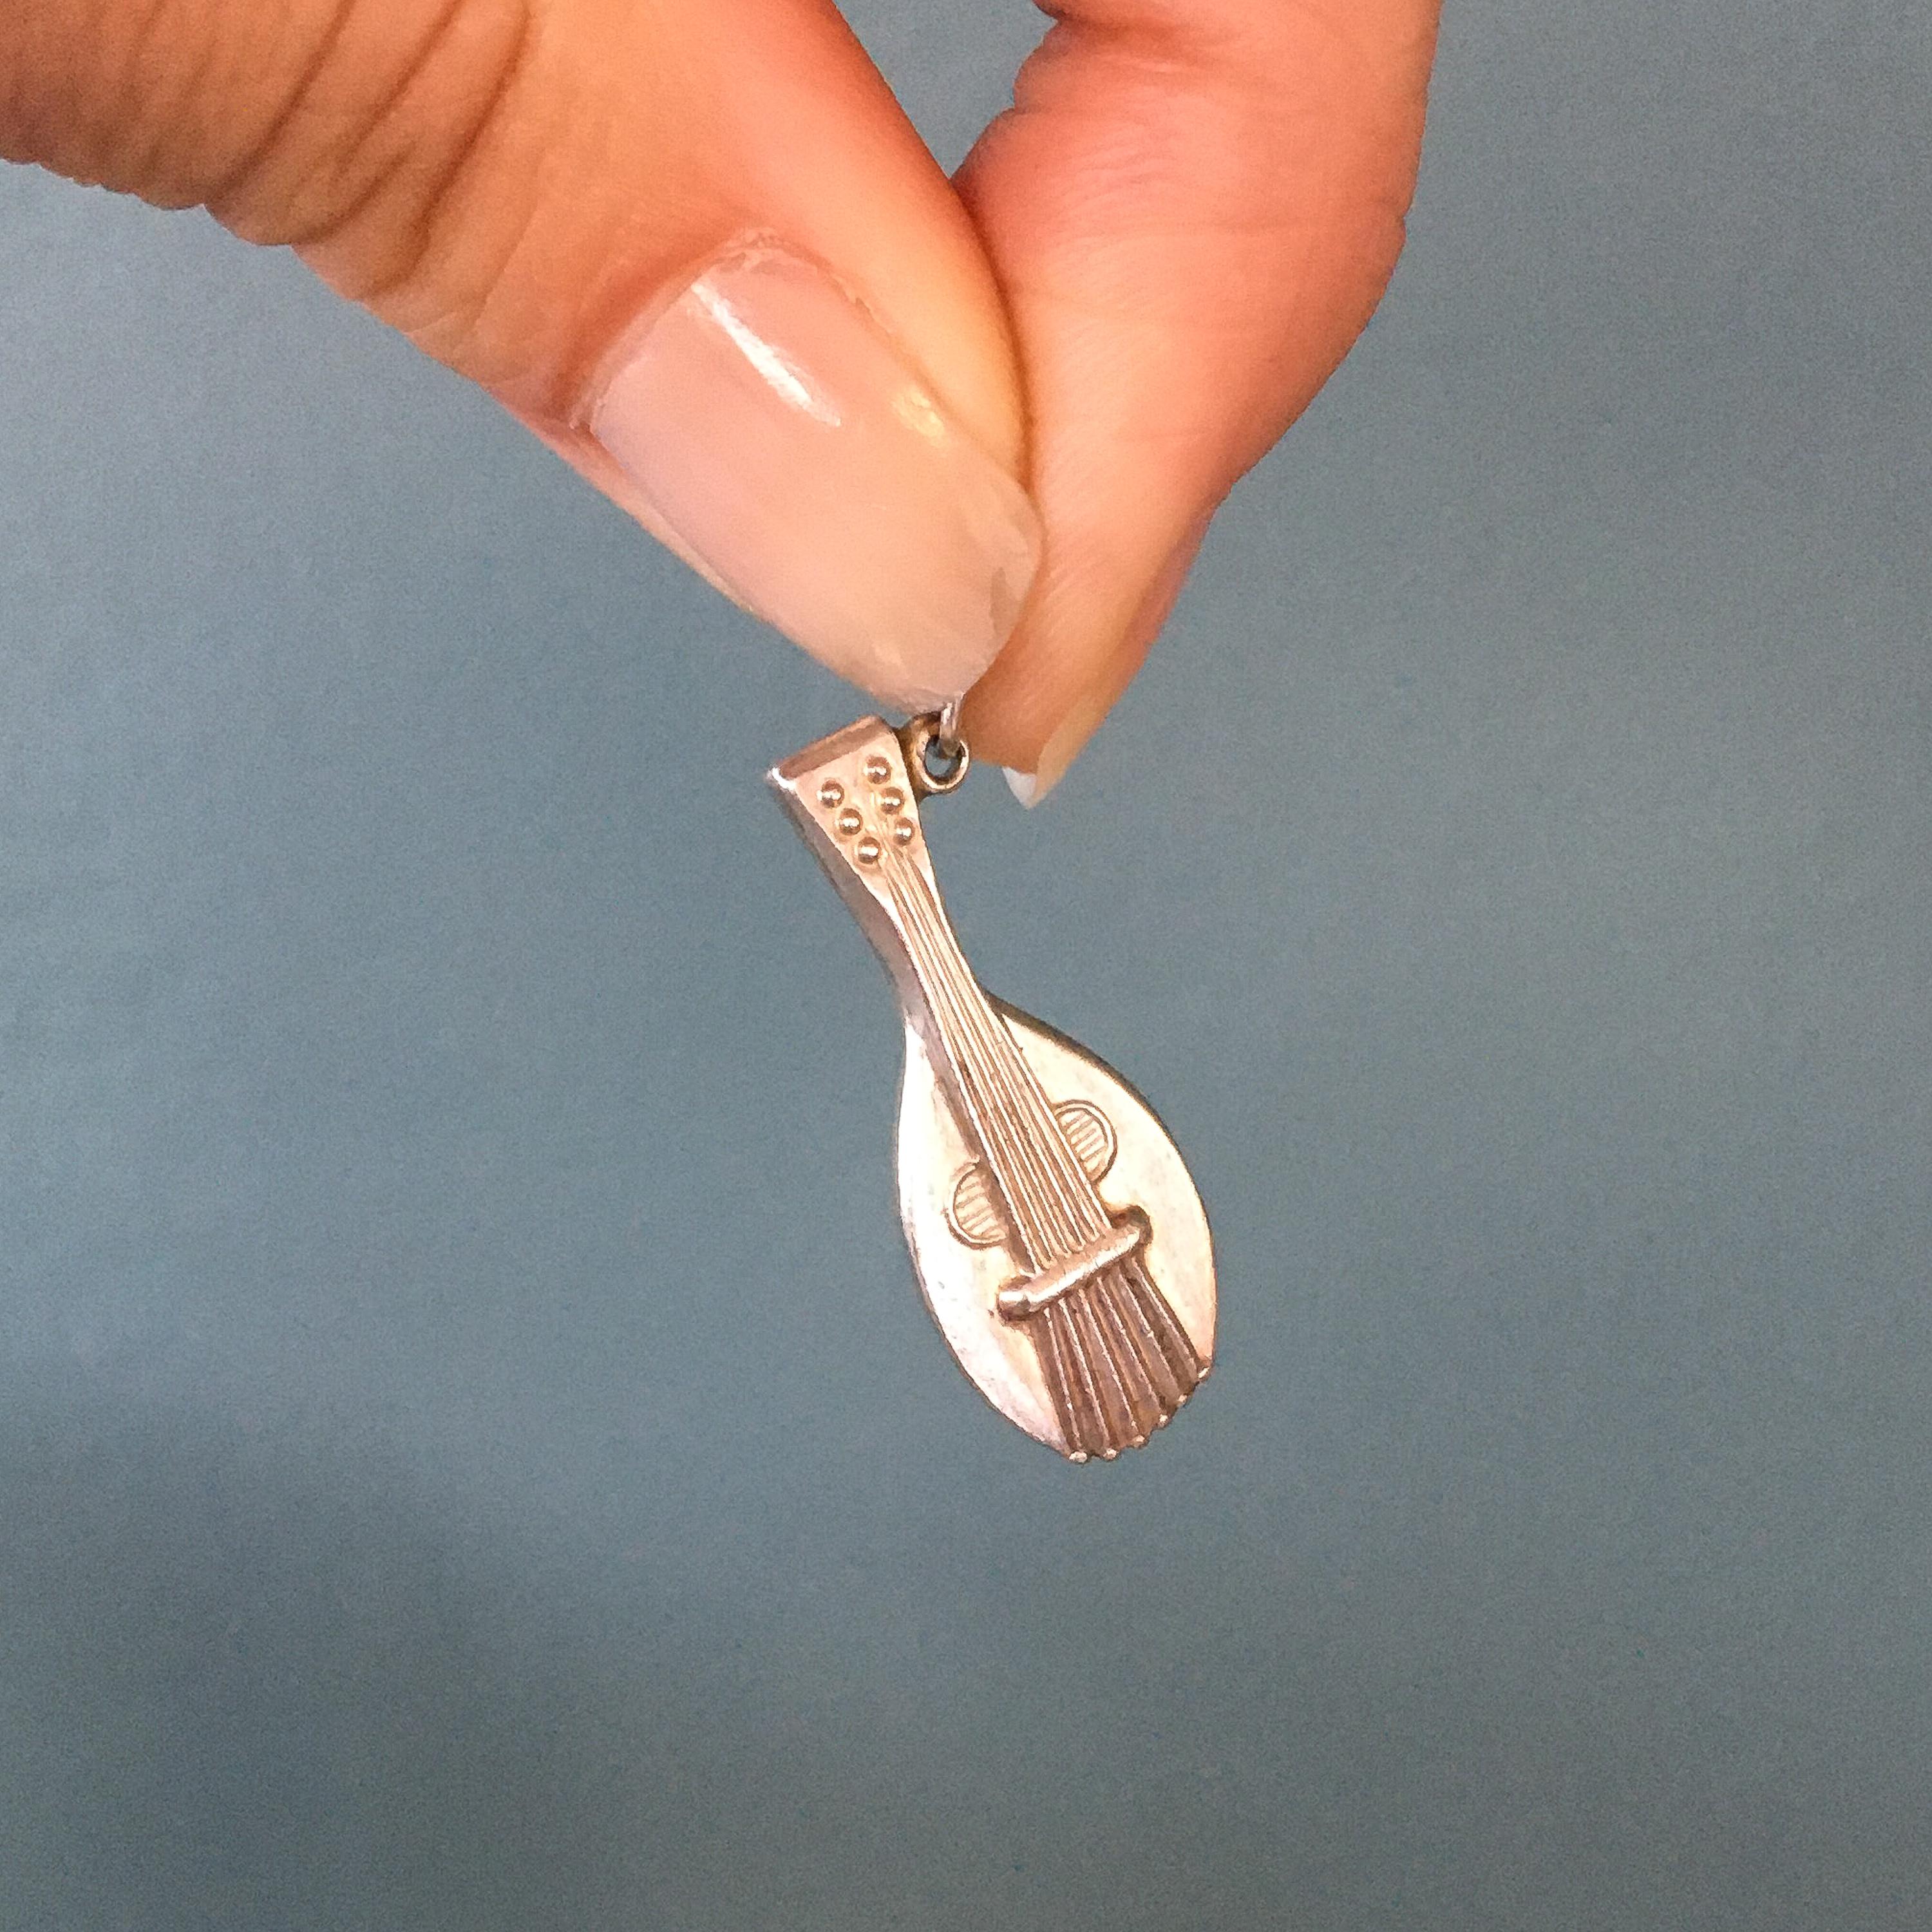 Vintage silver mandolin guitar charm pendant. This detailed three-dimensional charm is made of silver. It's a lovely charm to add to your charm bracelet, wear as a necklace, or stacked with your favorite pieces.

The charm is in very good